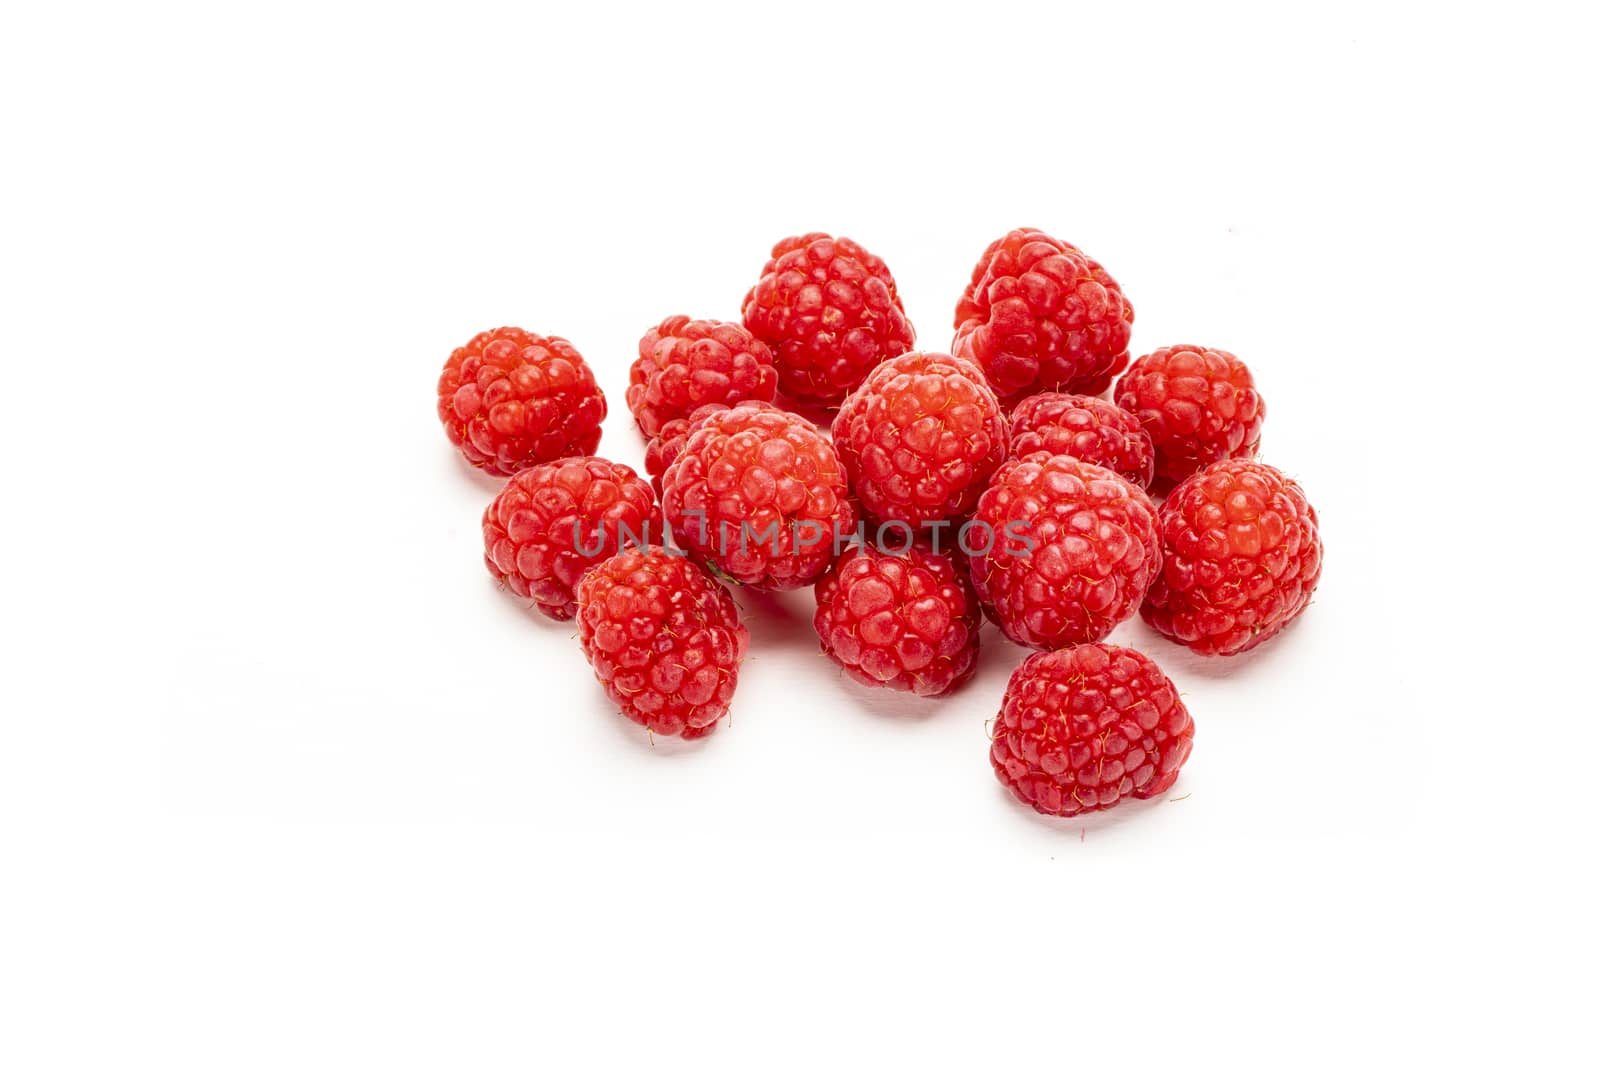 Fresh raspberries on white background. by Nawoot